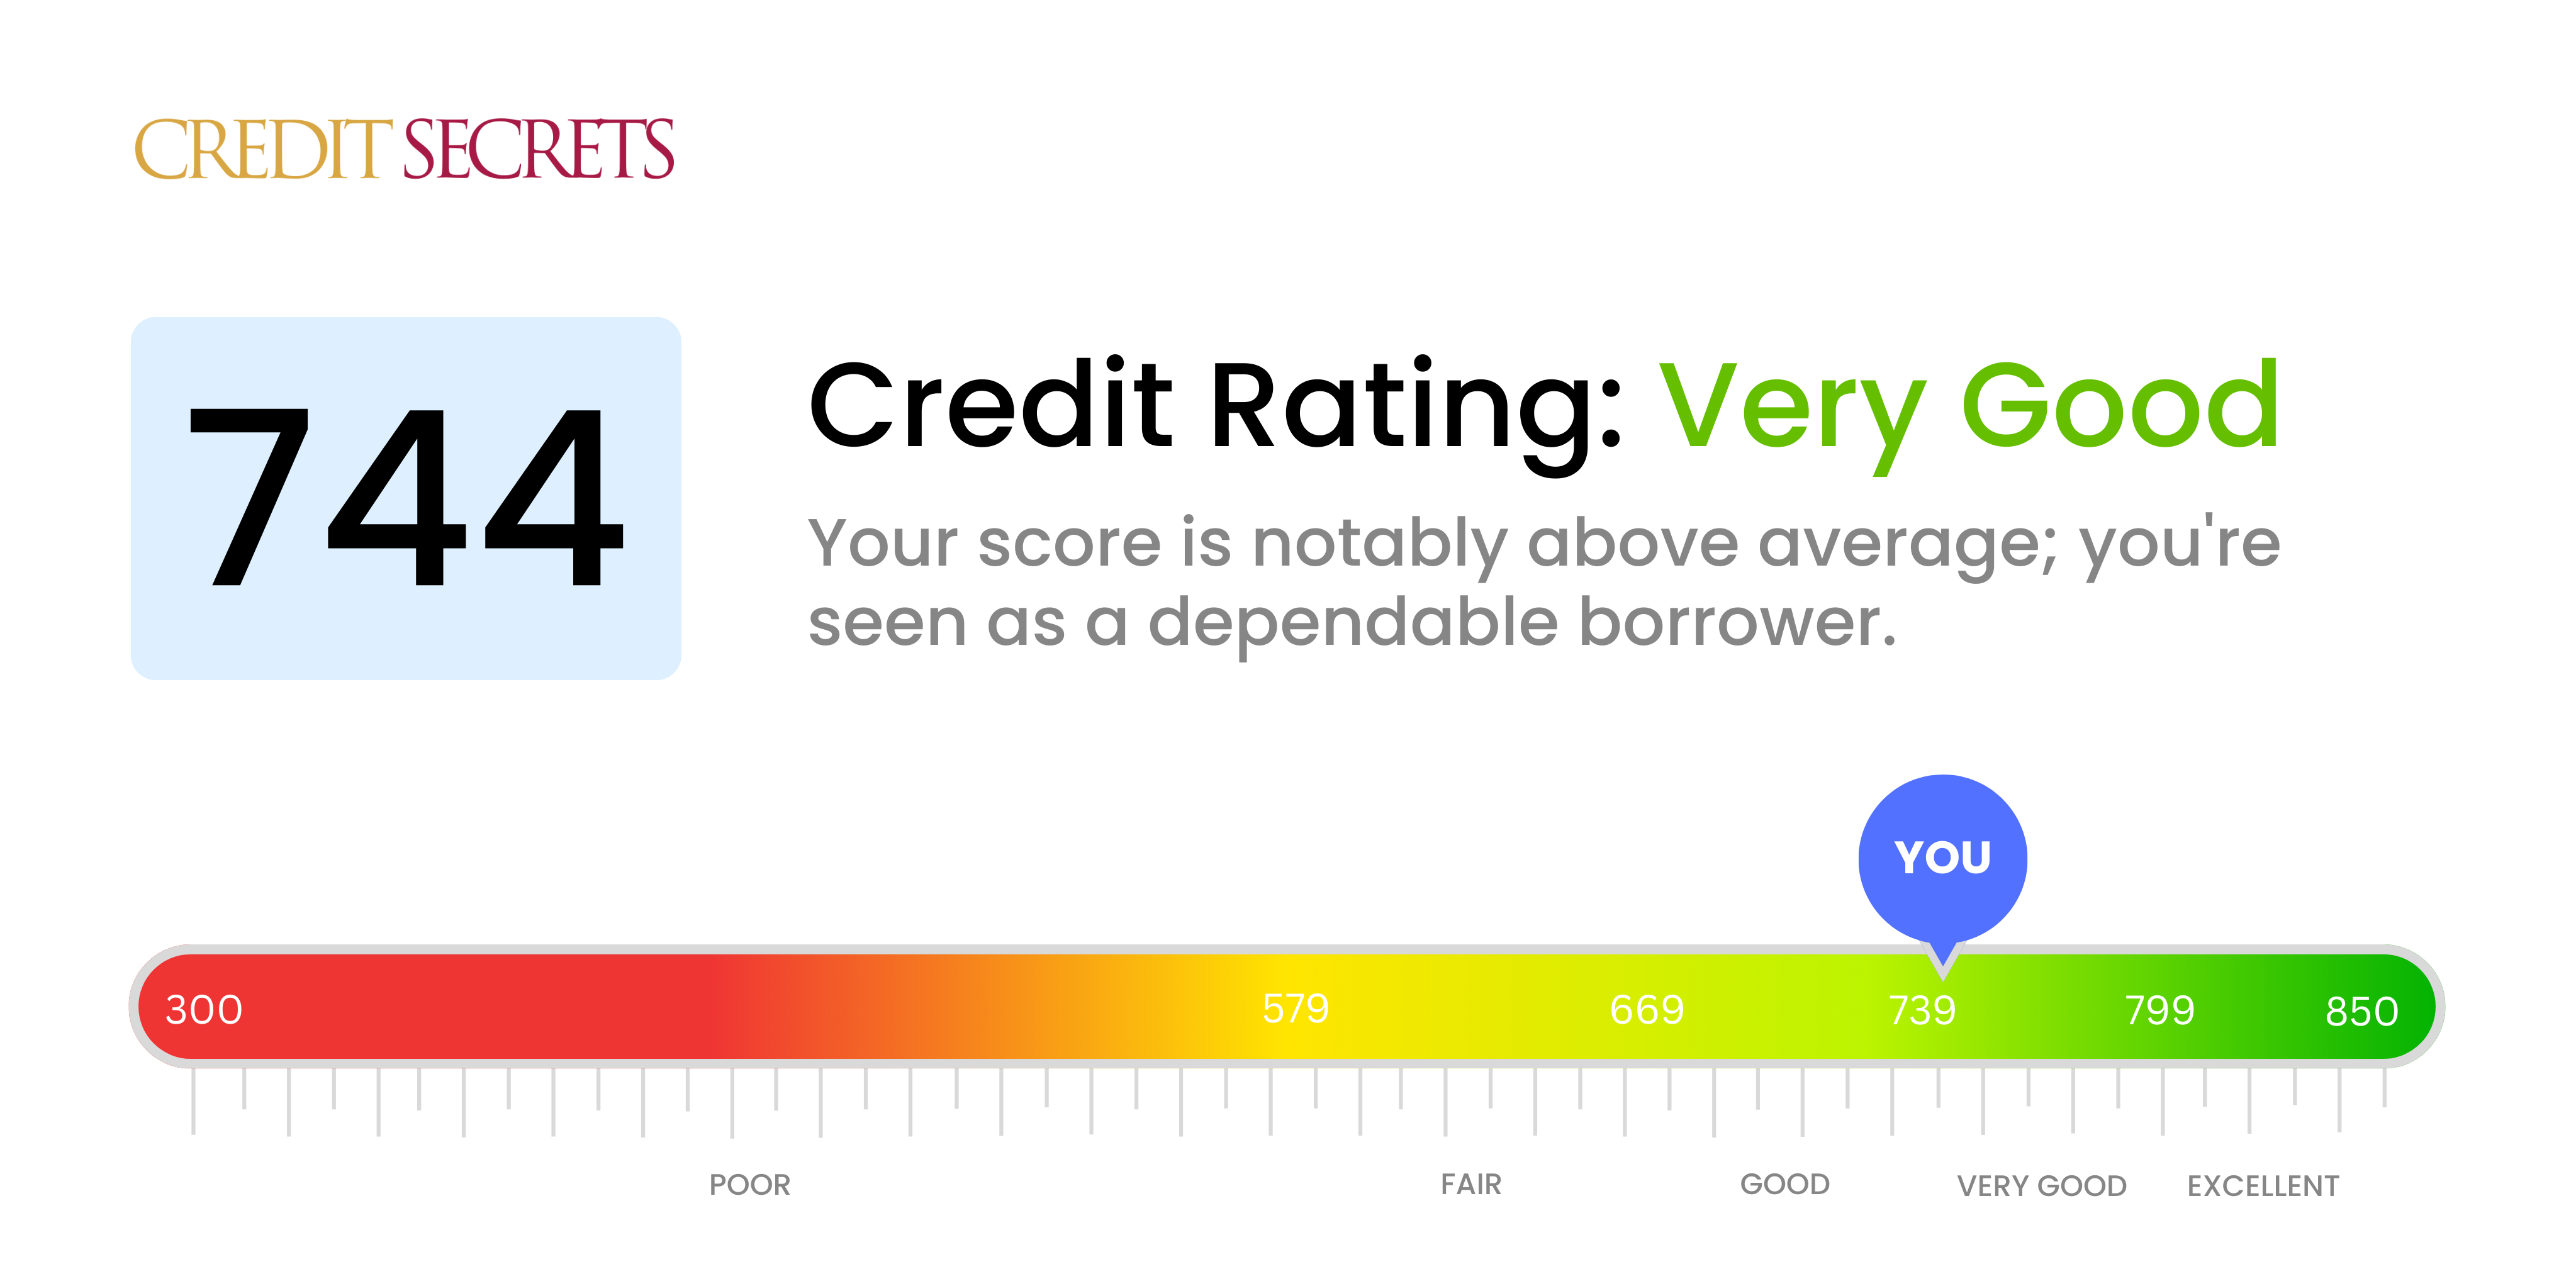 Is 744 a good credit score?